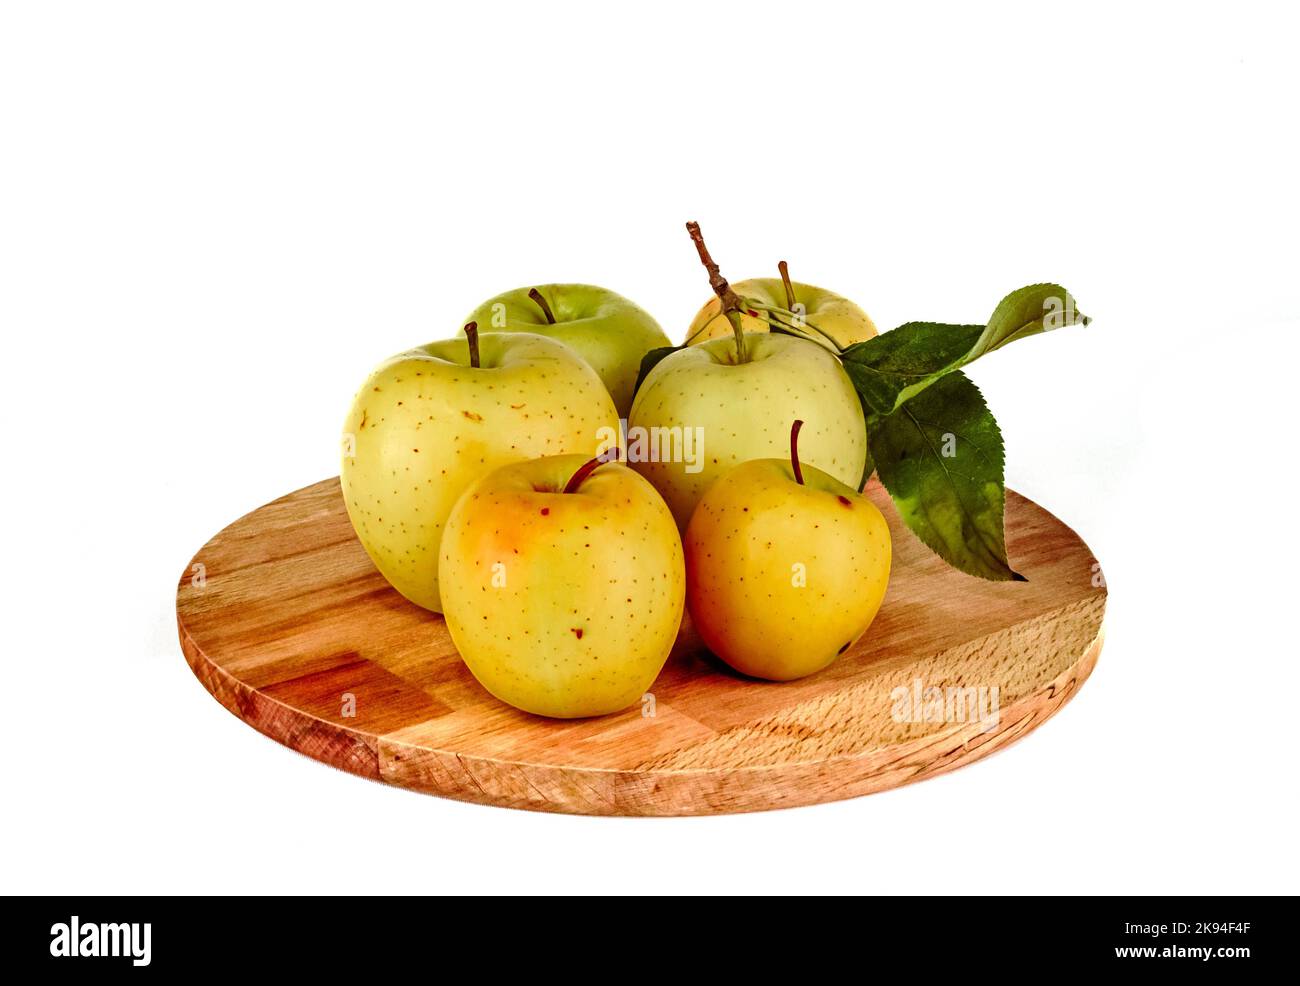 https://c8.alamy.com/comp/2K94F4F/yellow-apples-on-a-wooden-cutting-board-bunch-of-yellow-golden-apples-on-a-white-background-with-green-leaf-small-to-big-isolated-2K94F4F.jpg